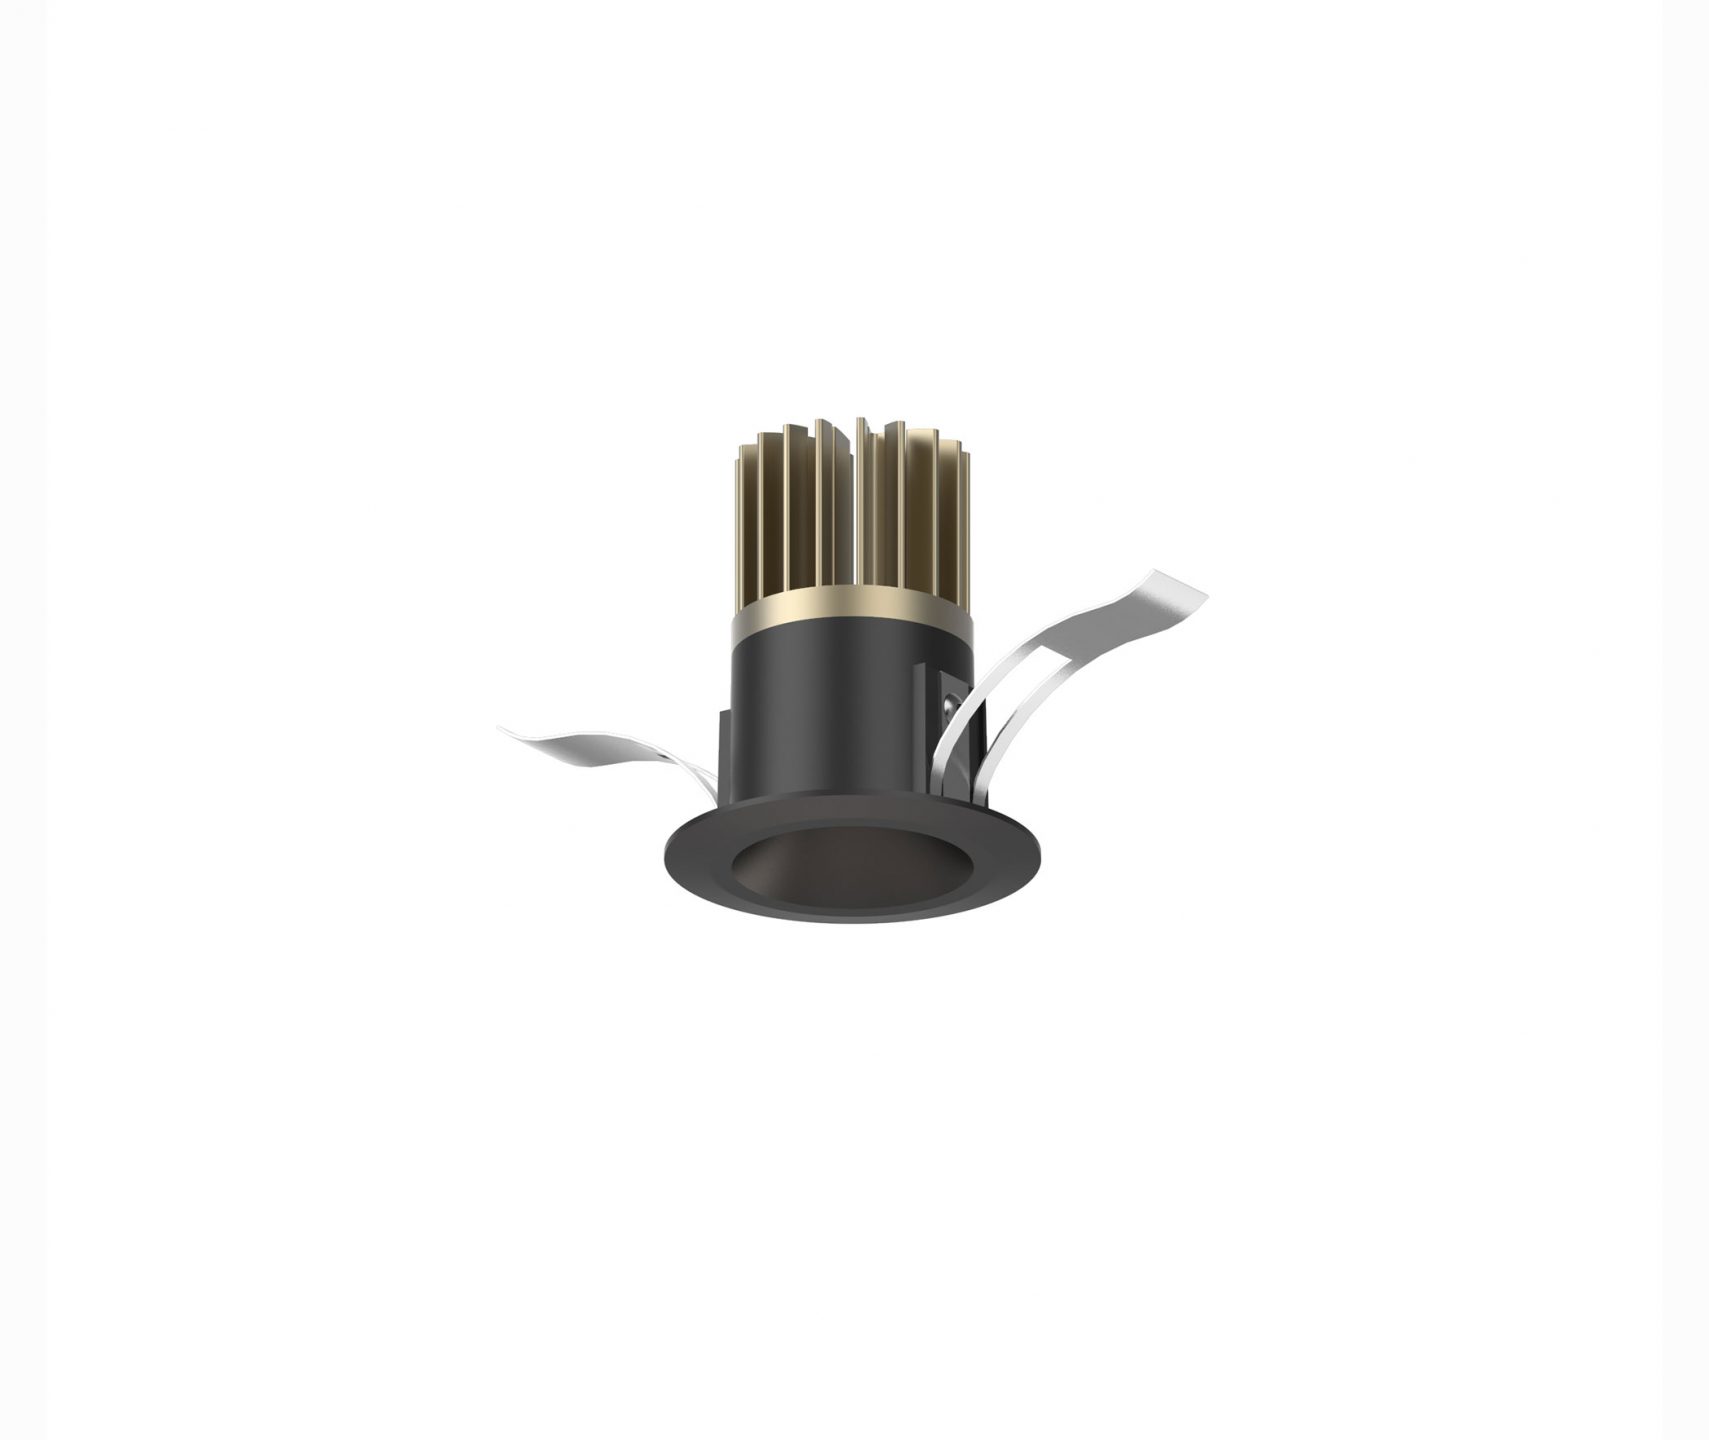 SONNEMAN_Intervals-Recessed-Downlights-Fixed-Round-Bevel-1_int_products